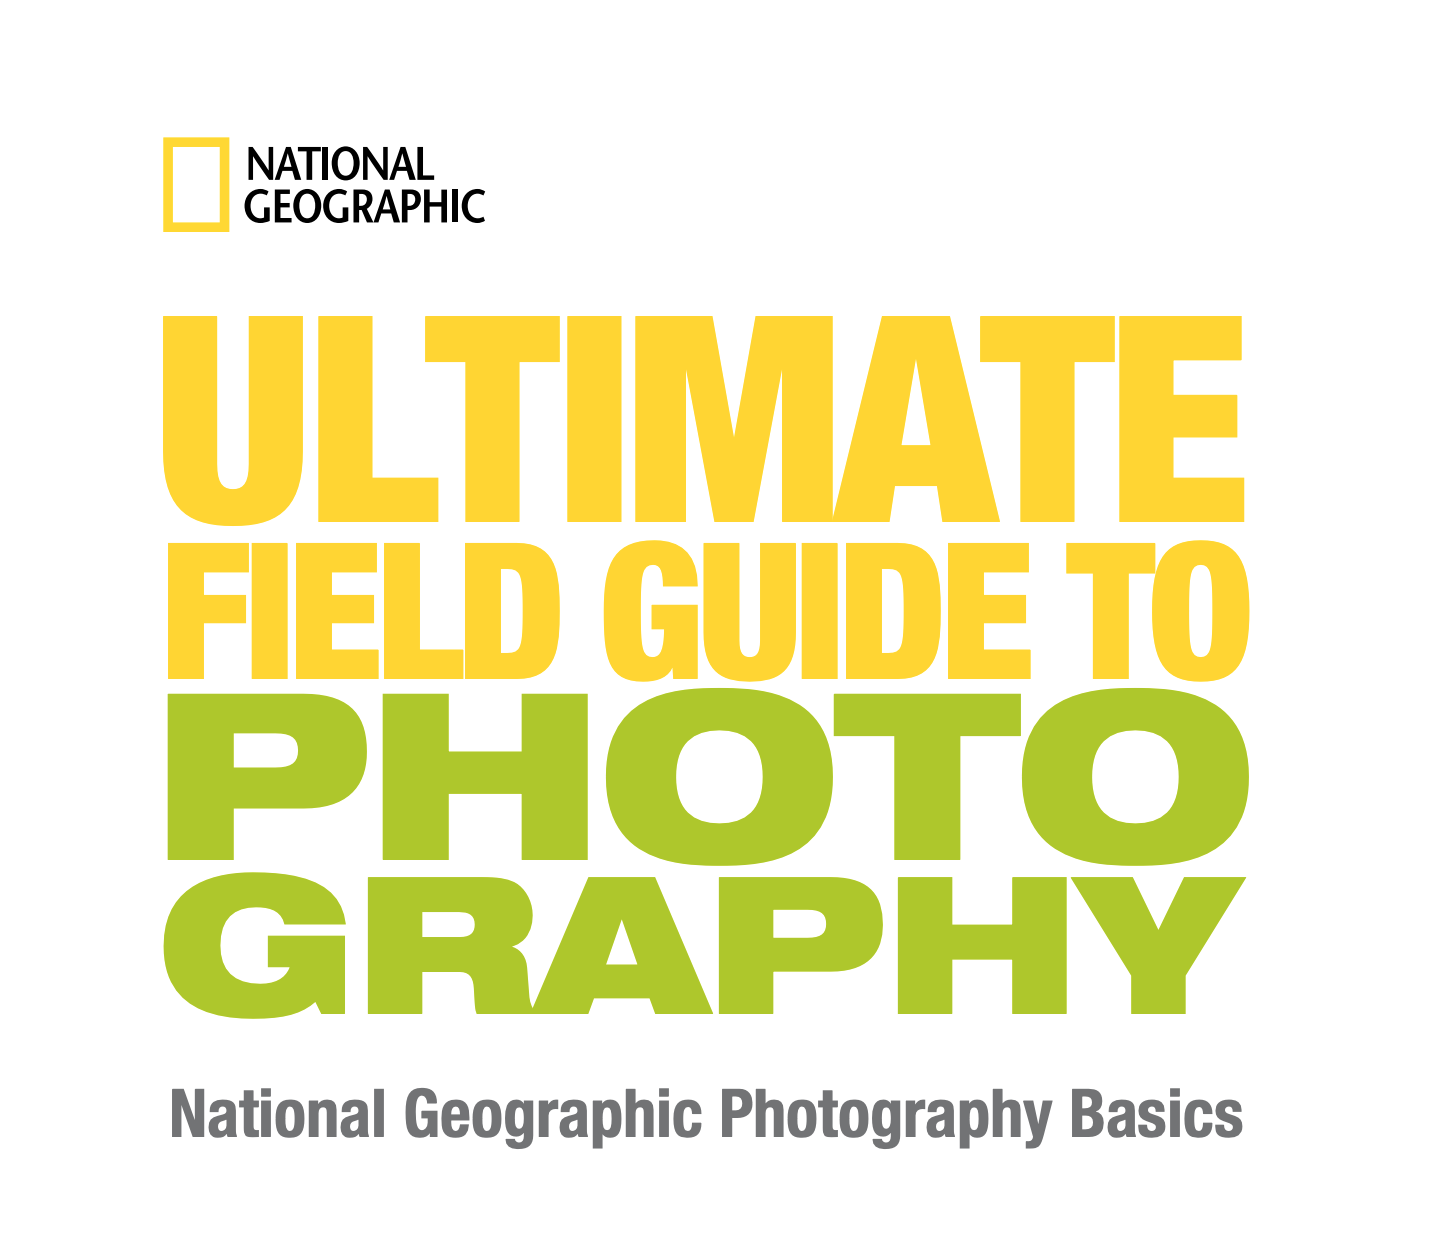 National Geographic field guide poster